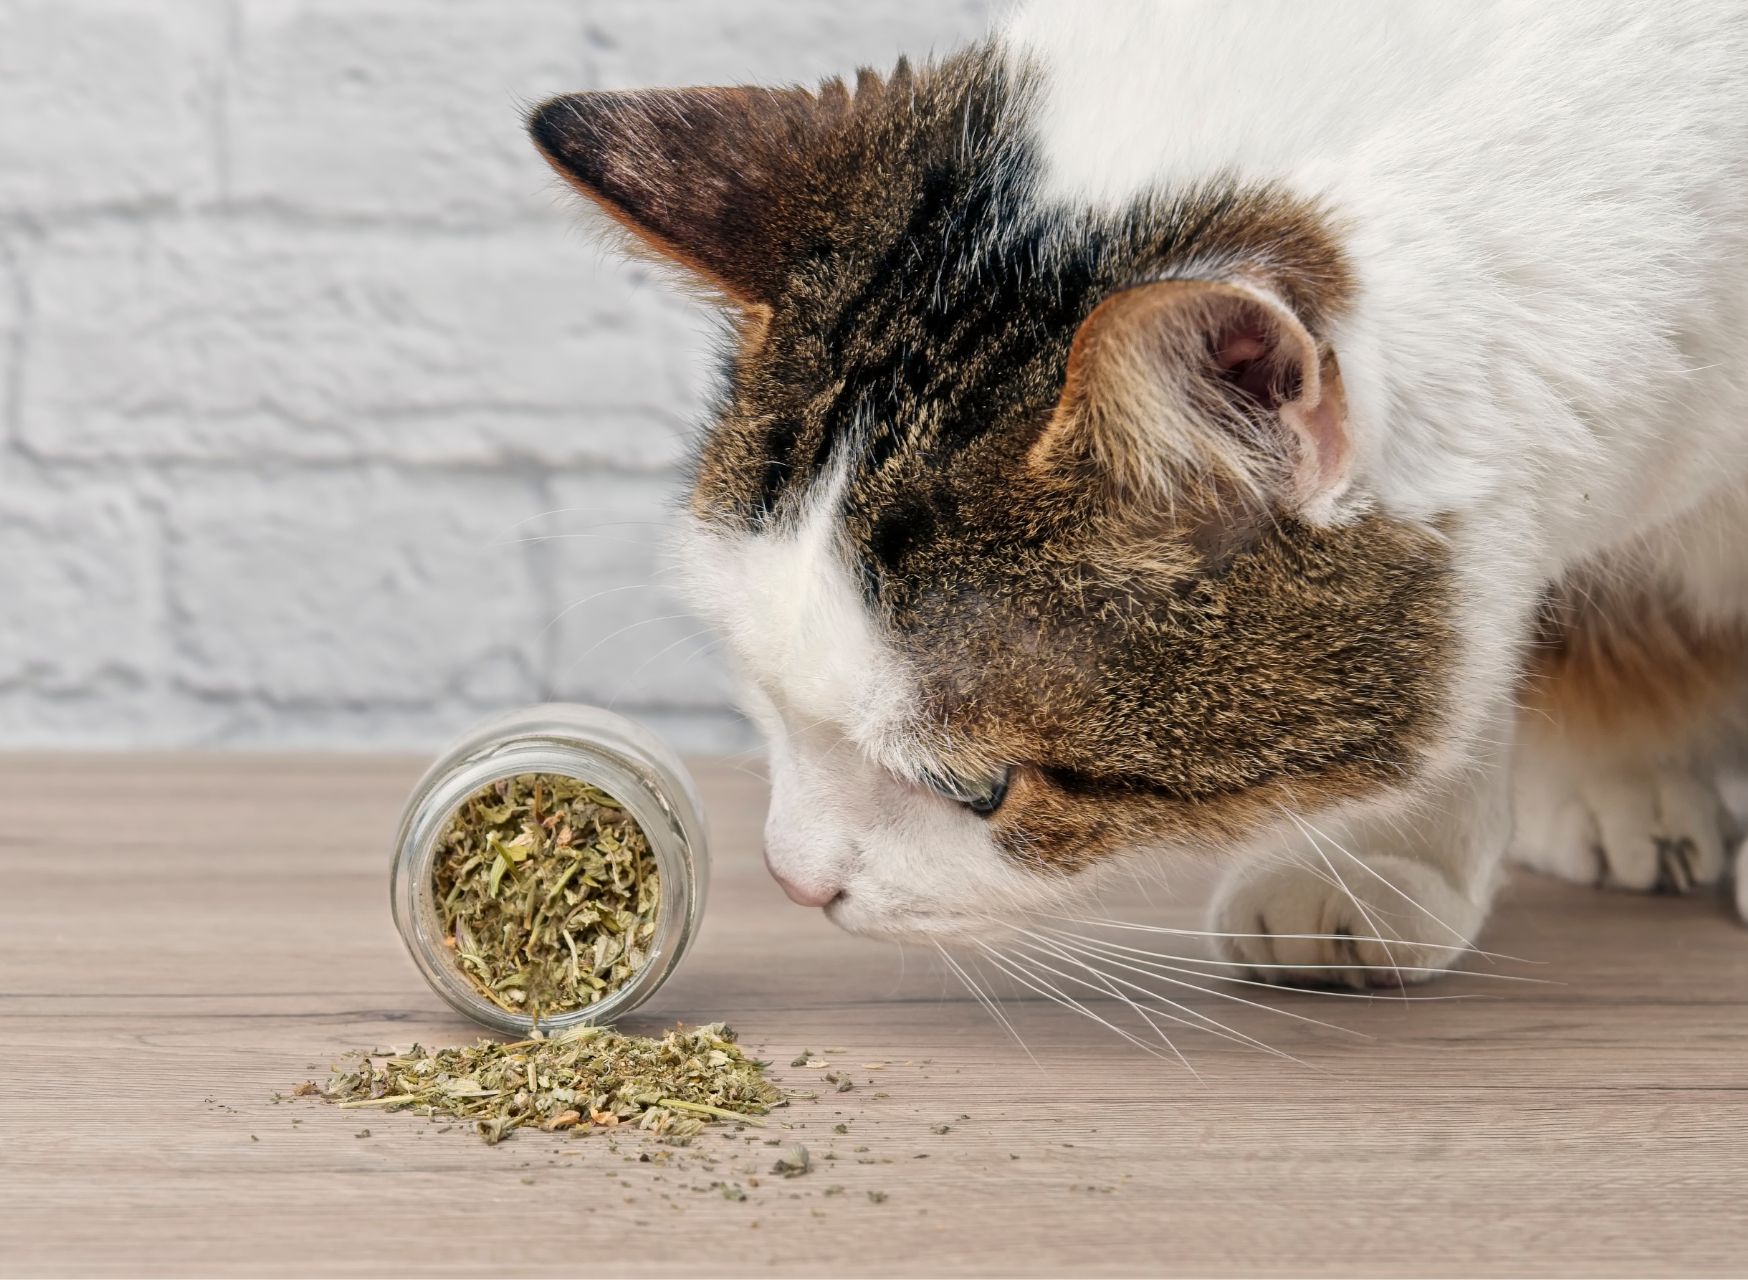 The Cat Smells Catnip - Herbs Safe For Cats | Pawcool ™